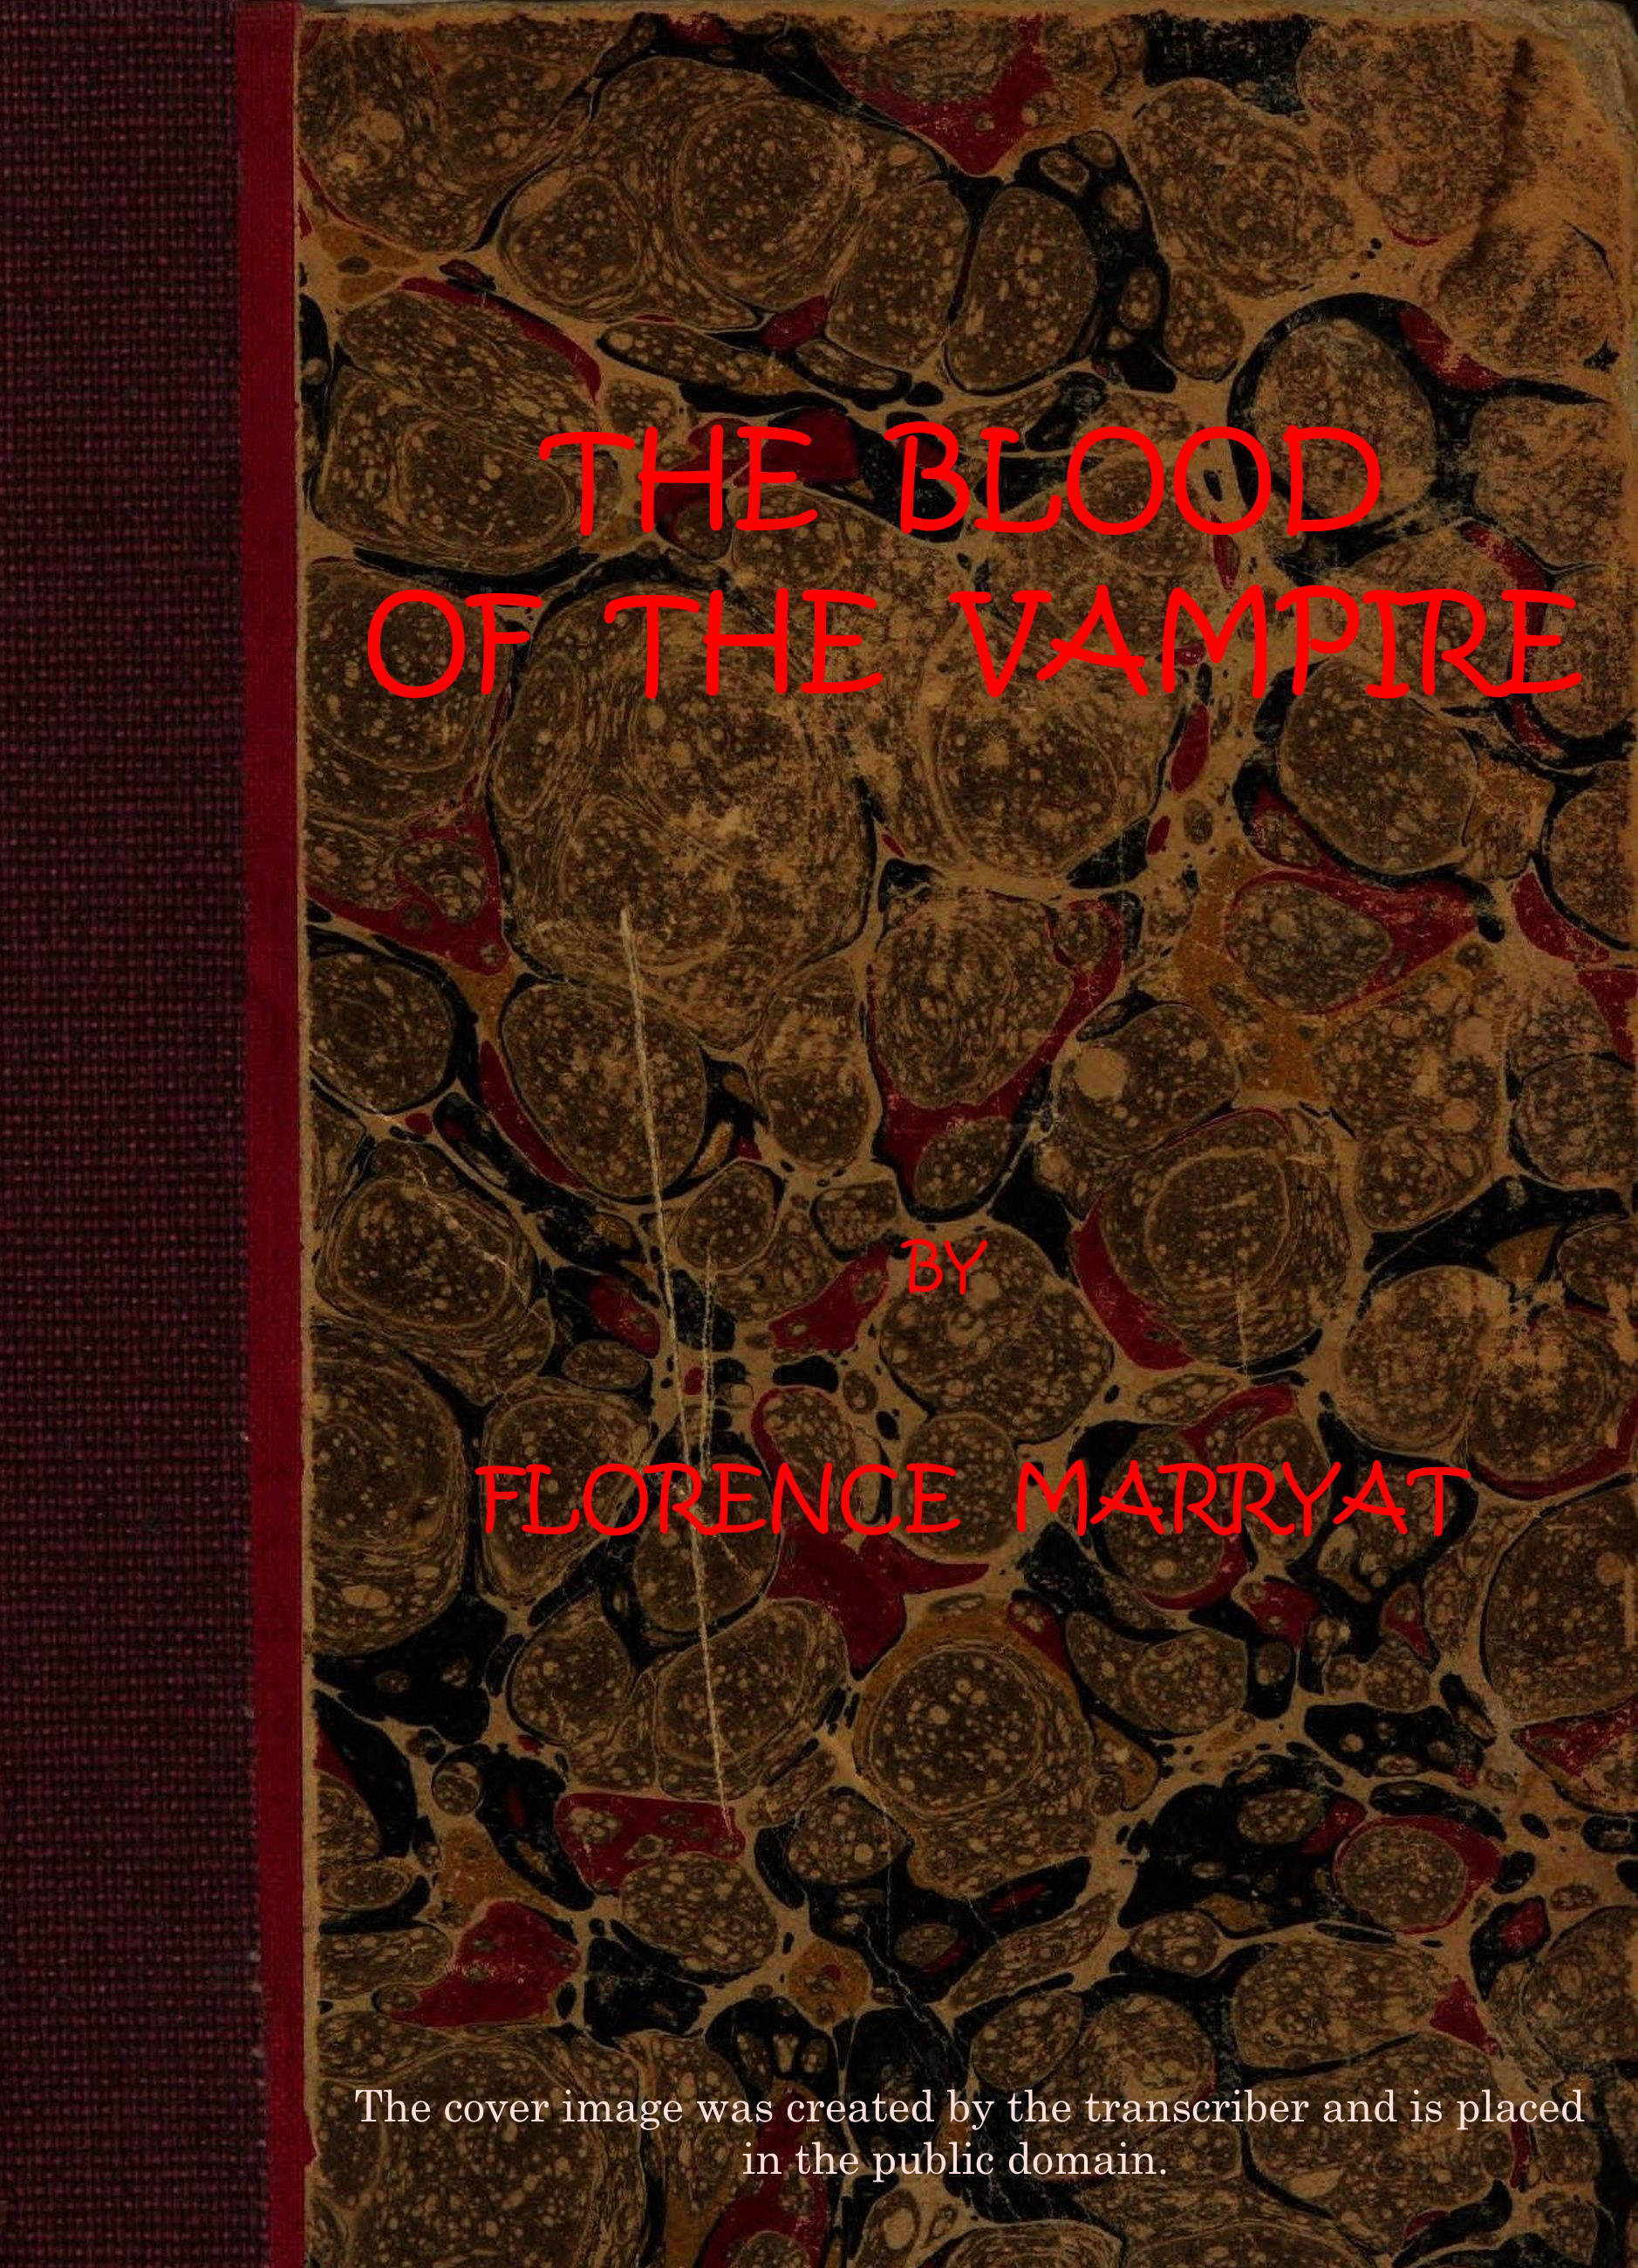 The Blood of the Vampire, by Florence Marryat—A Project Gutenberg eBook